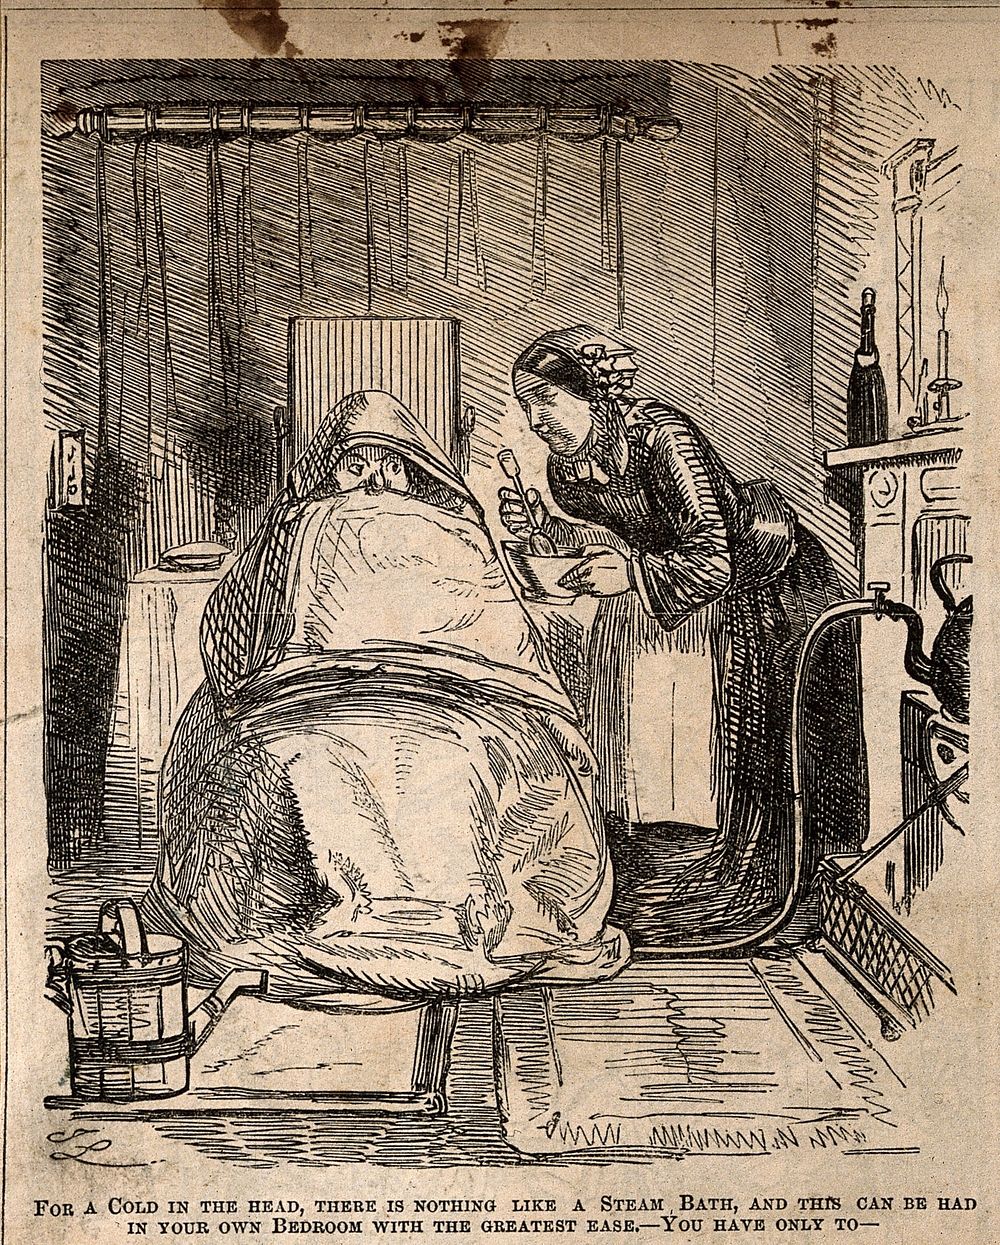 A man ill with a cold, wrapped in blankets as his servant attempts to give him a steam bath. Wood engraving.